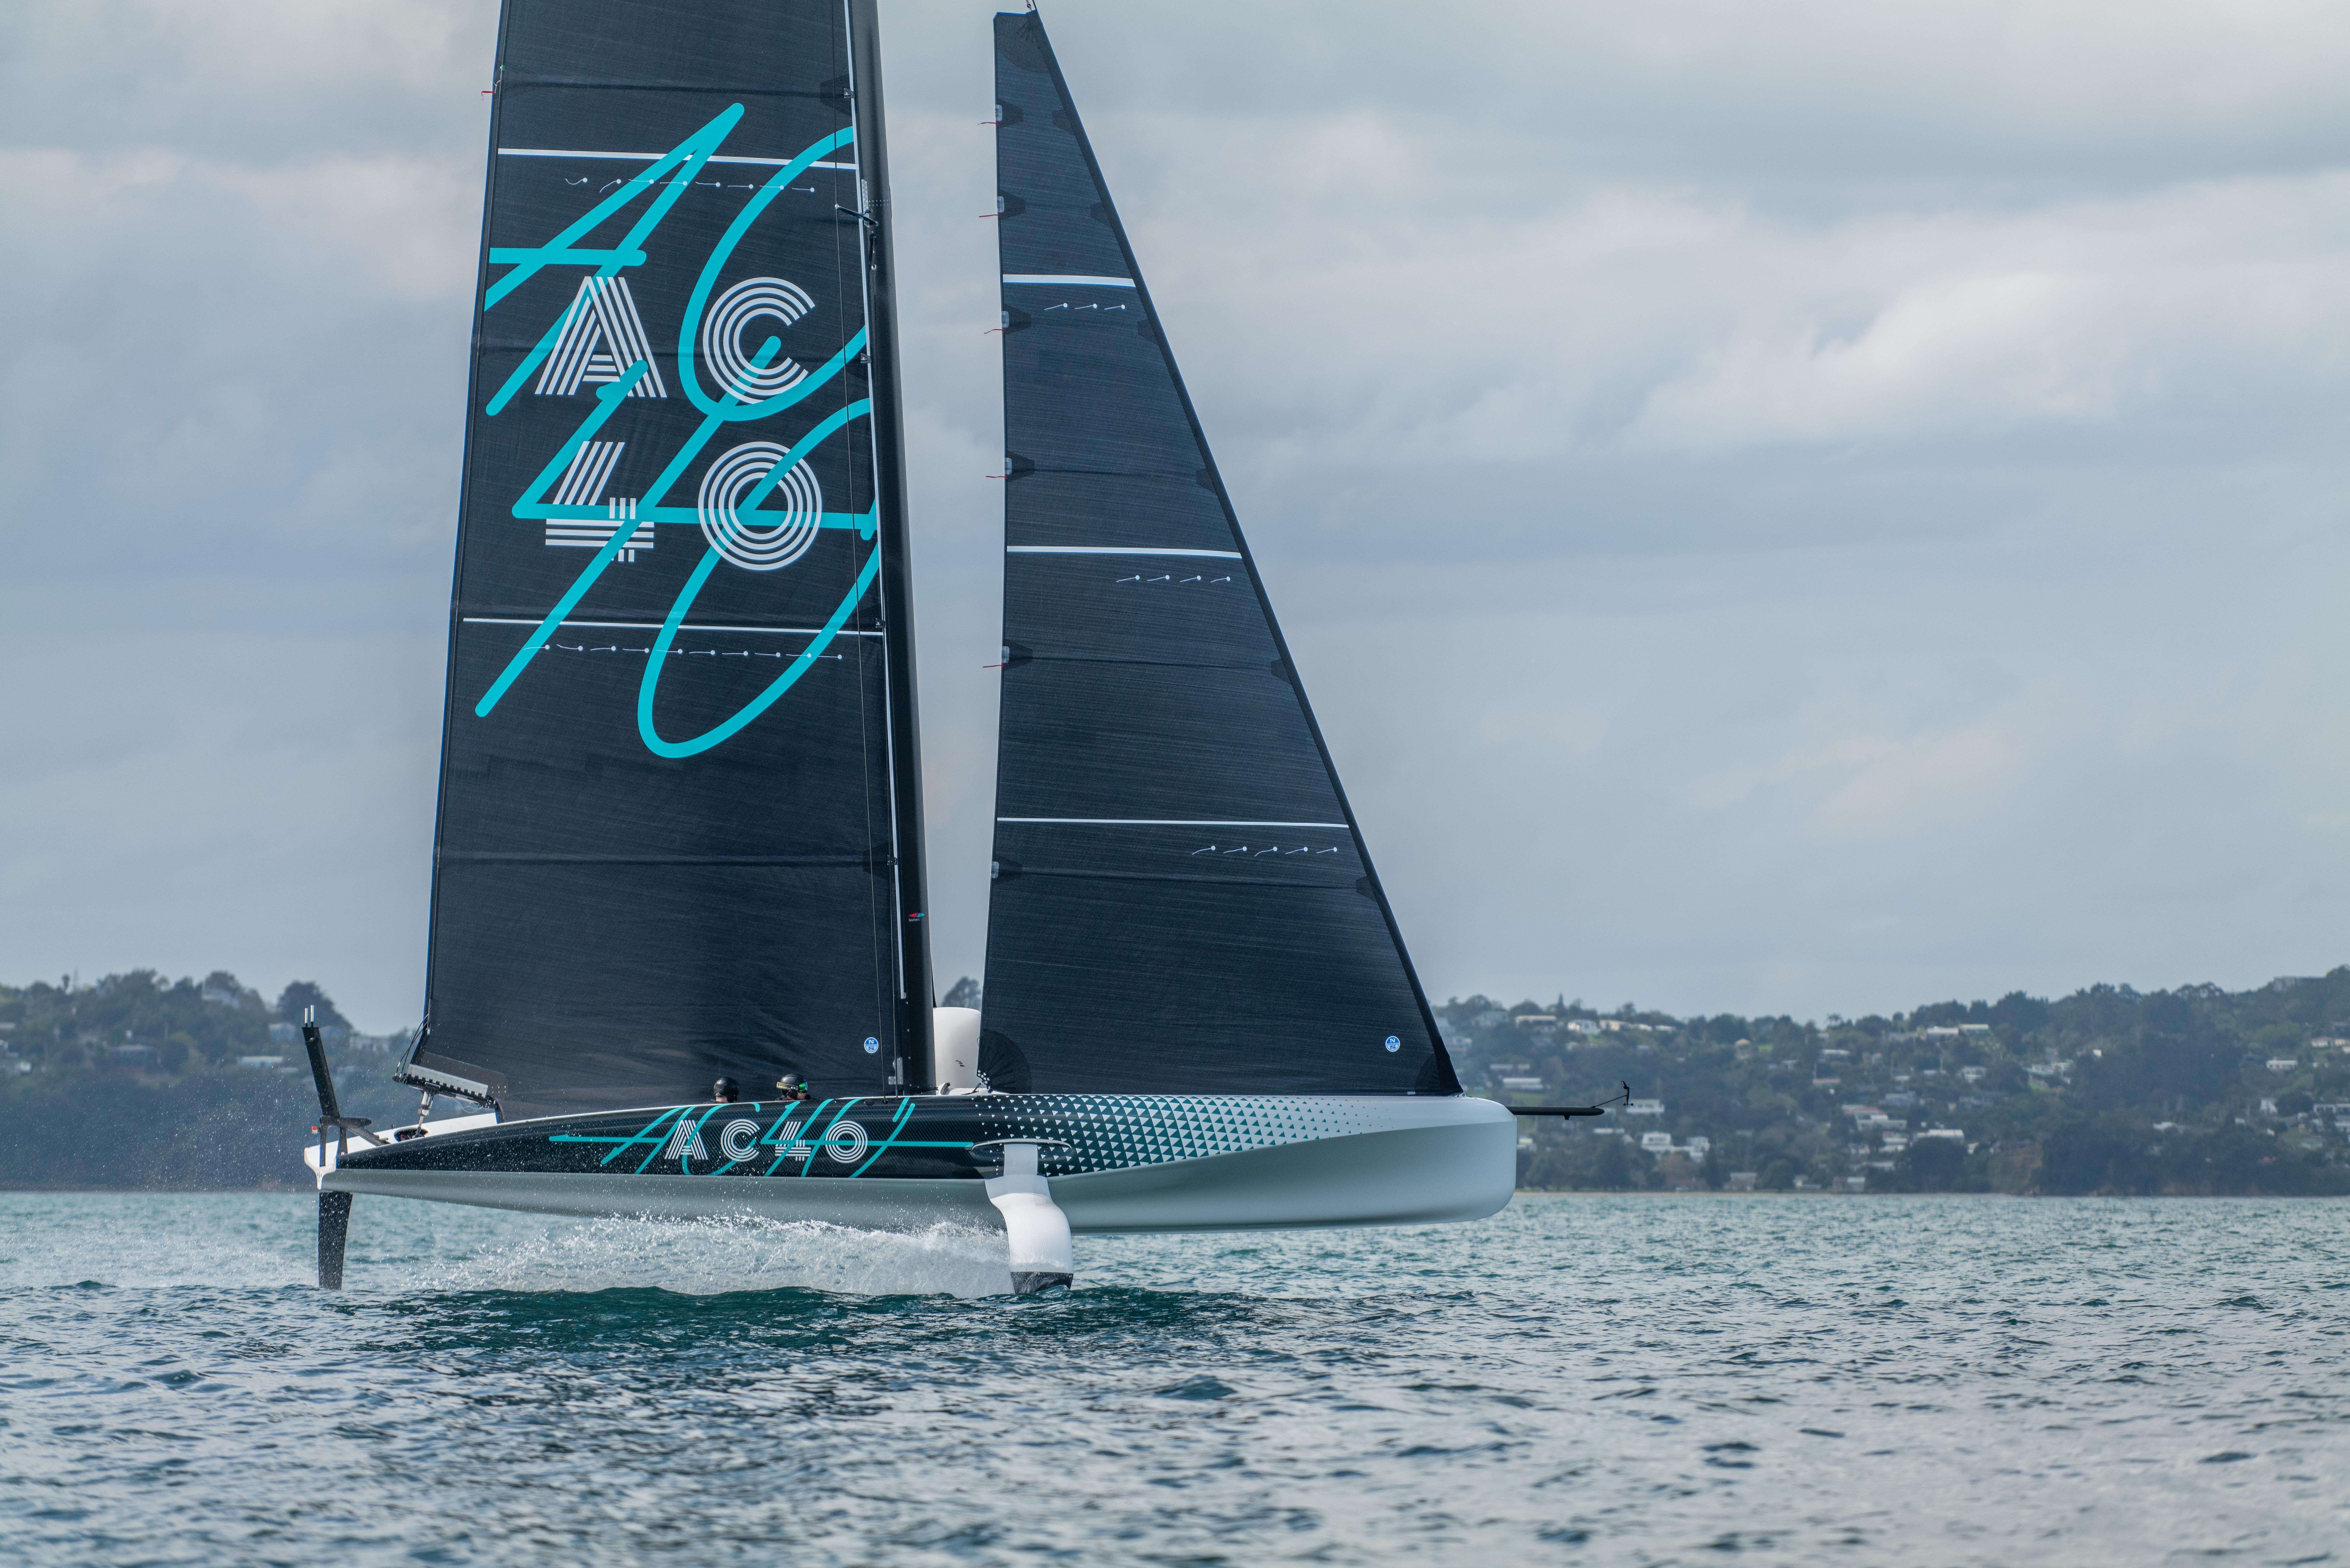 America’s Cup, the AC40 is sailing